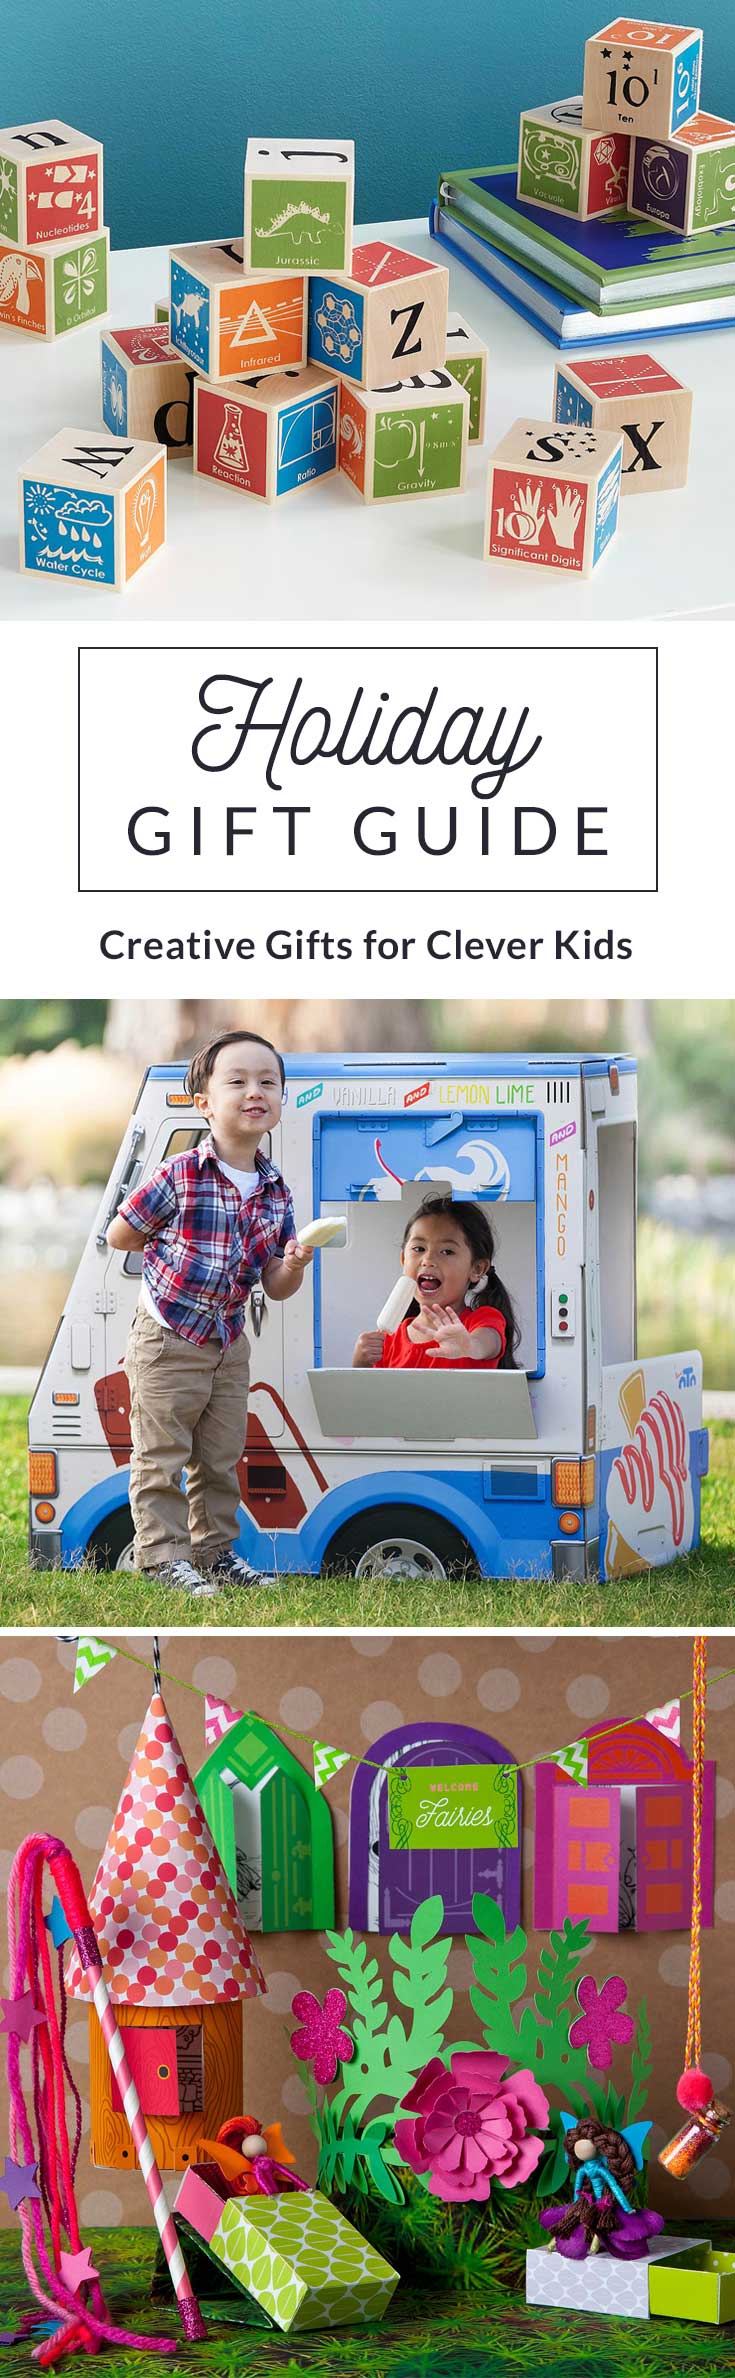 We selected an assortment of fun and educational gift for kids that are sure to keep little ones entertained while those little brains grow big and strong.